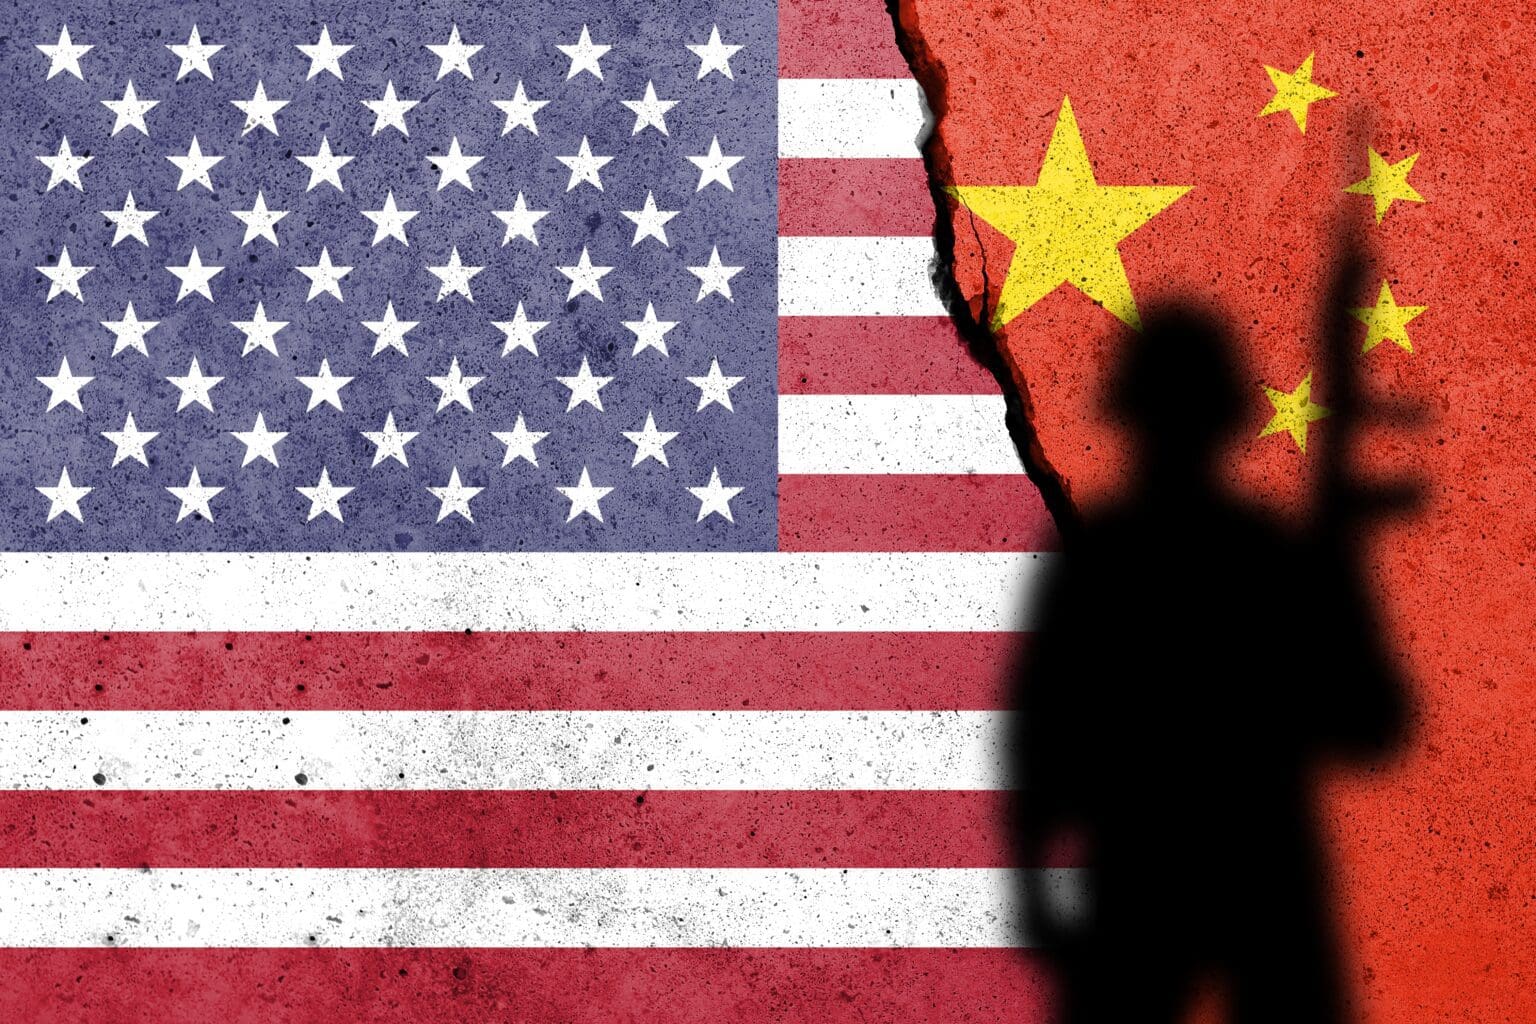 What Are the Chances for a Sino-American War?